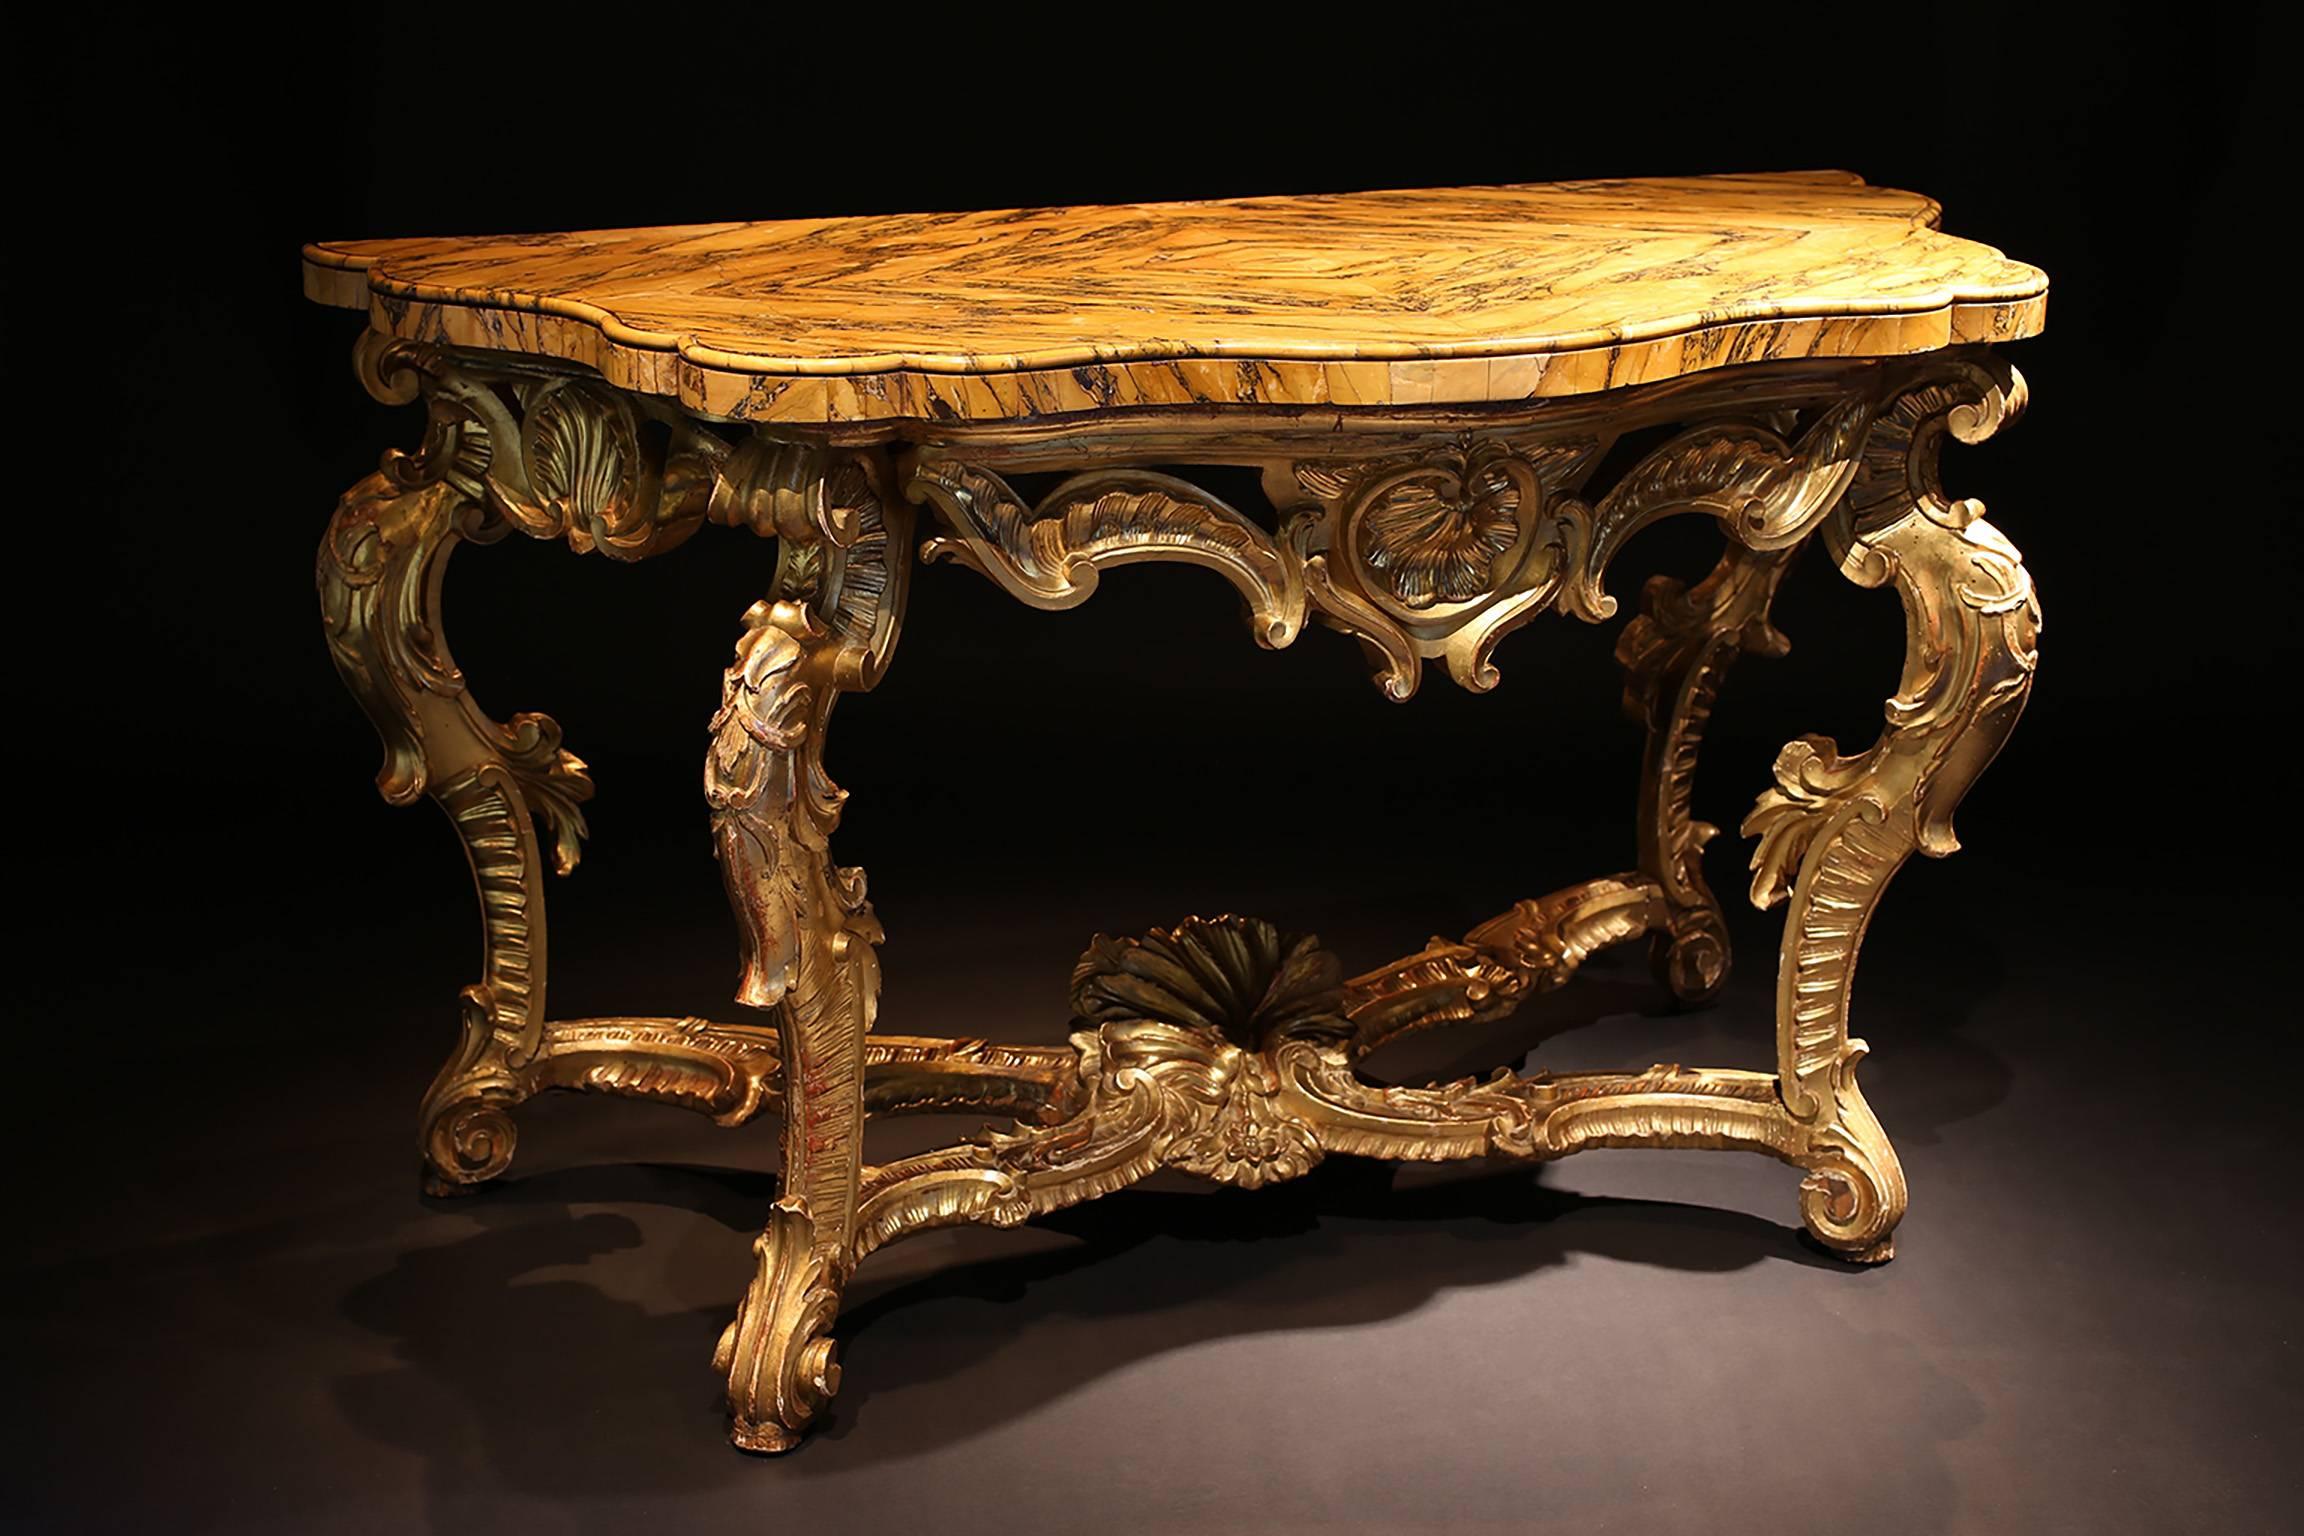 A mid-18th century Roman carved giltwood console table with a shaped serpentine Sienna marble veneered top with a shaped serpentine front and sides, standing on four legs joined by a stretcher base incorporating a carved shell. Good original